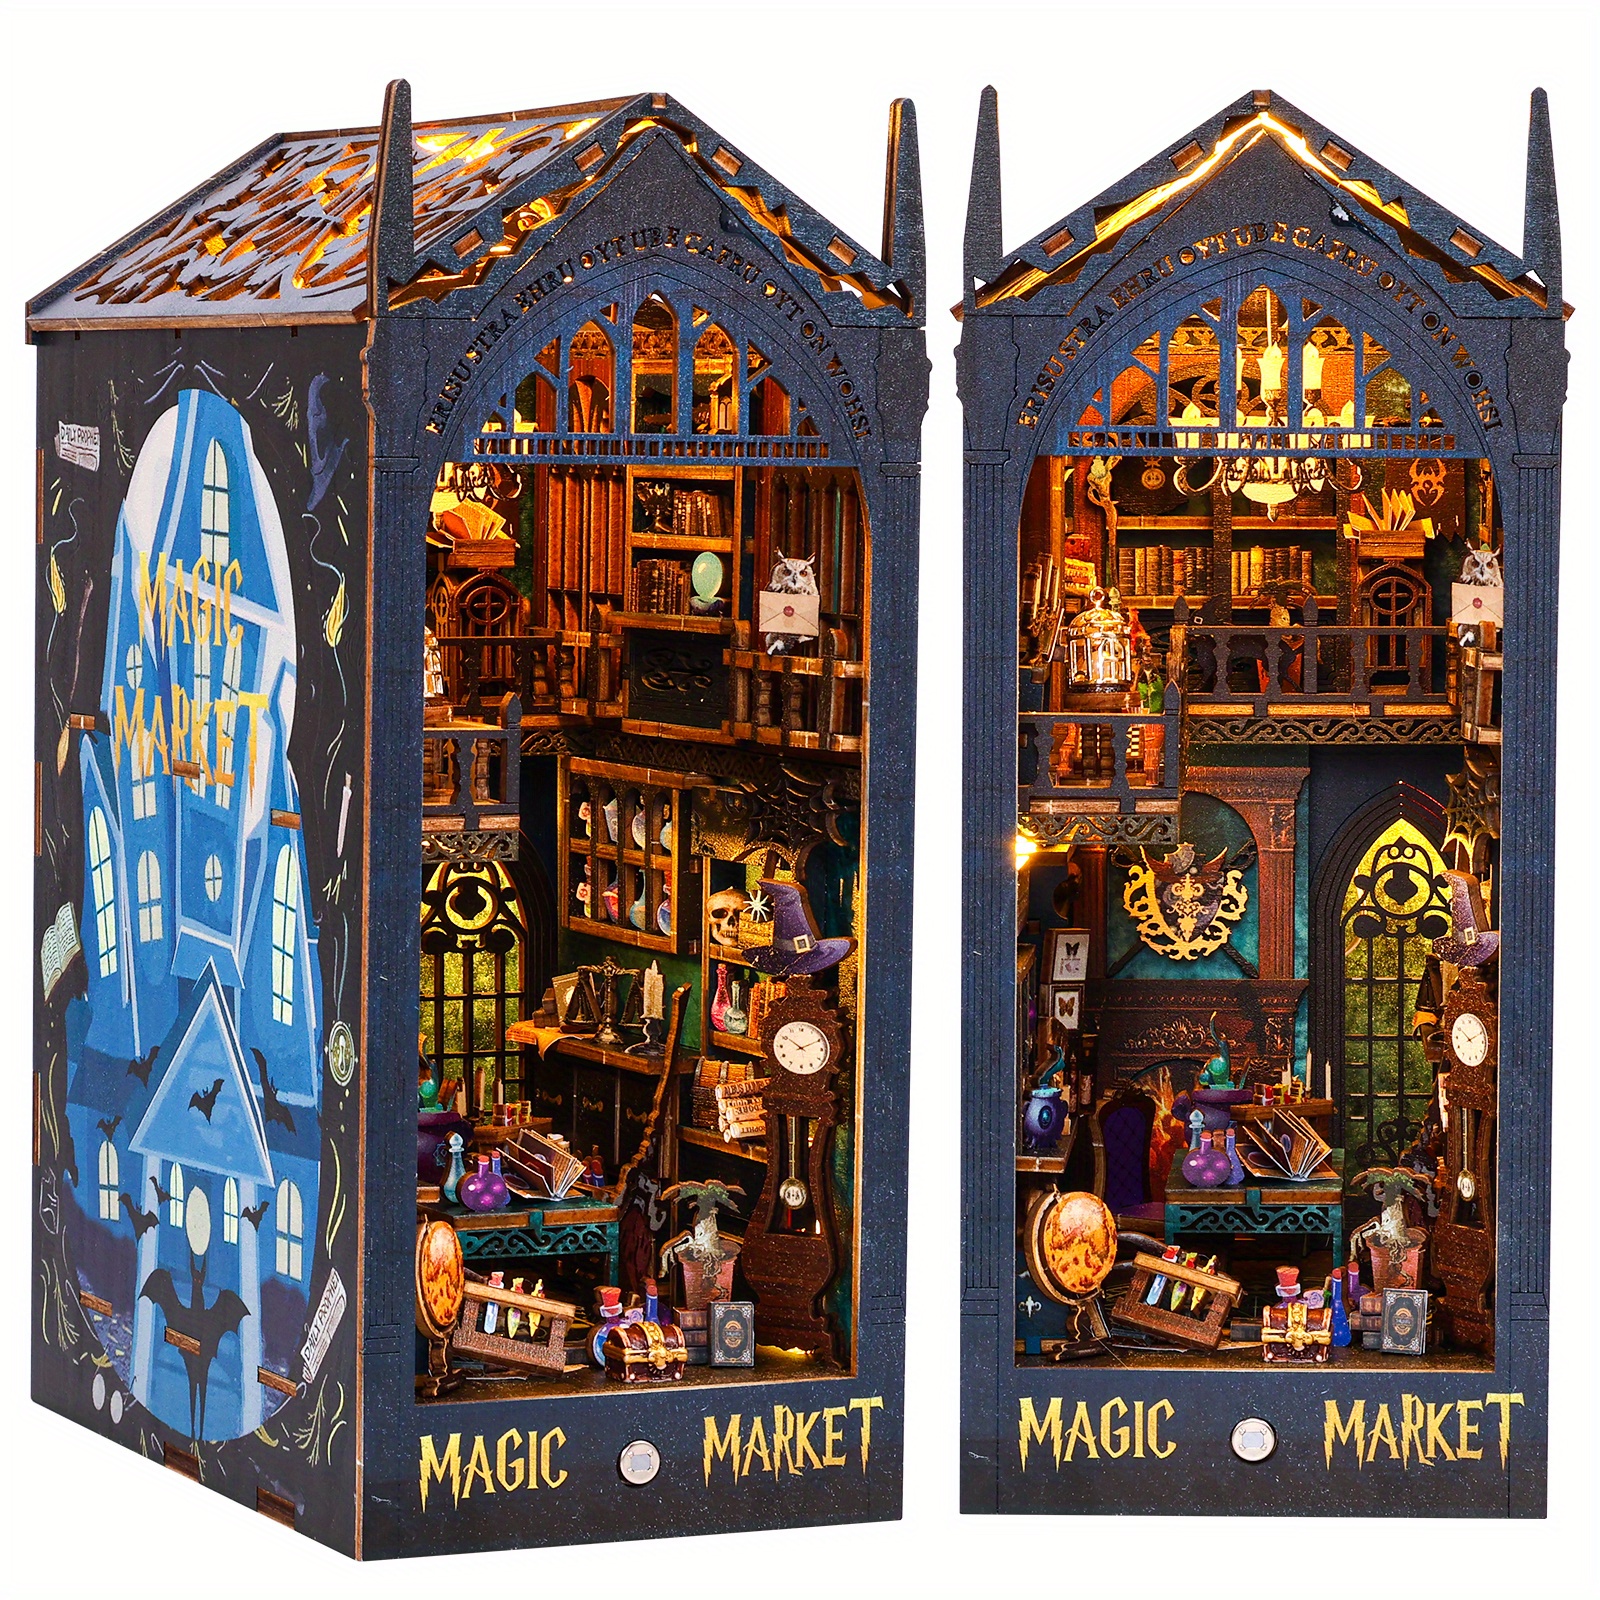 New Diy Wooden Book Nook Magic Market Doll House Kits With Light